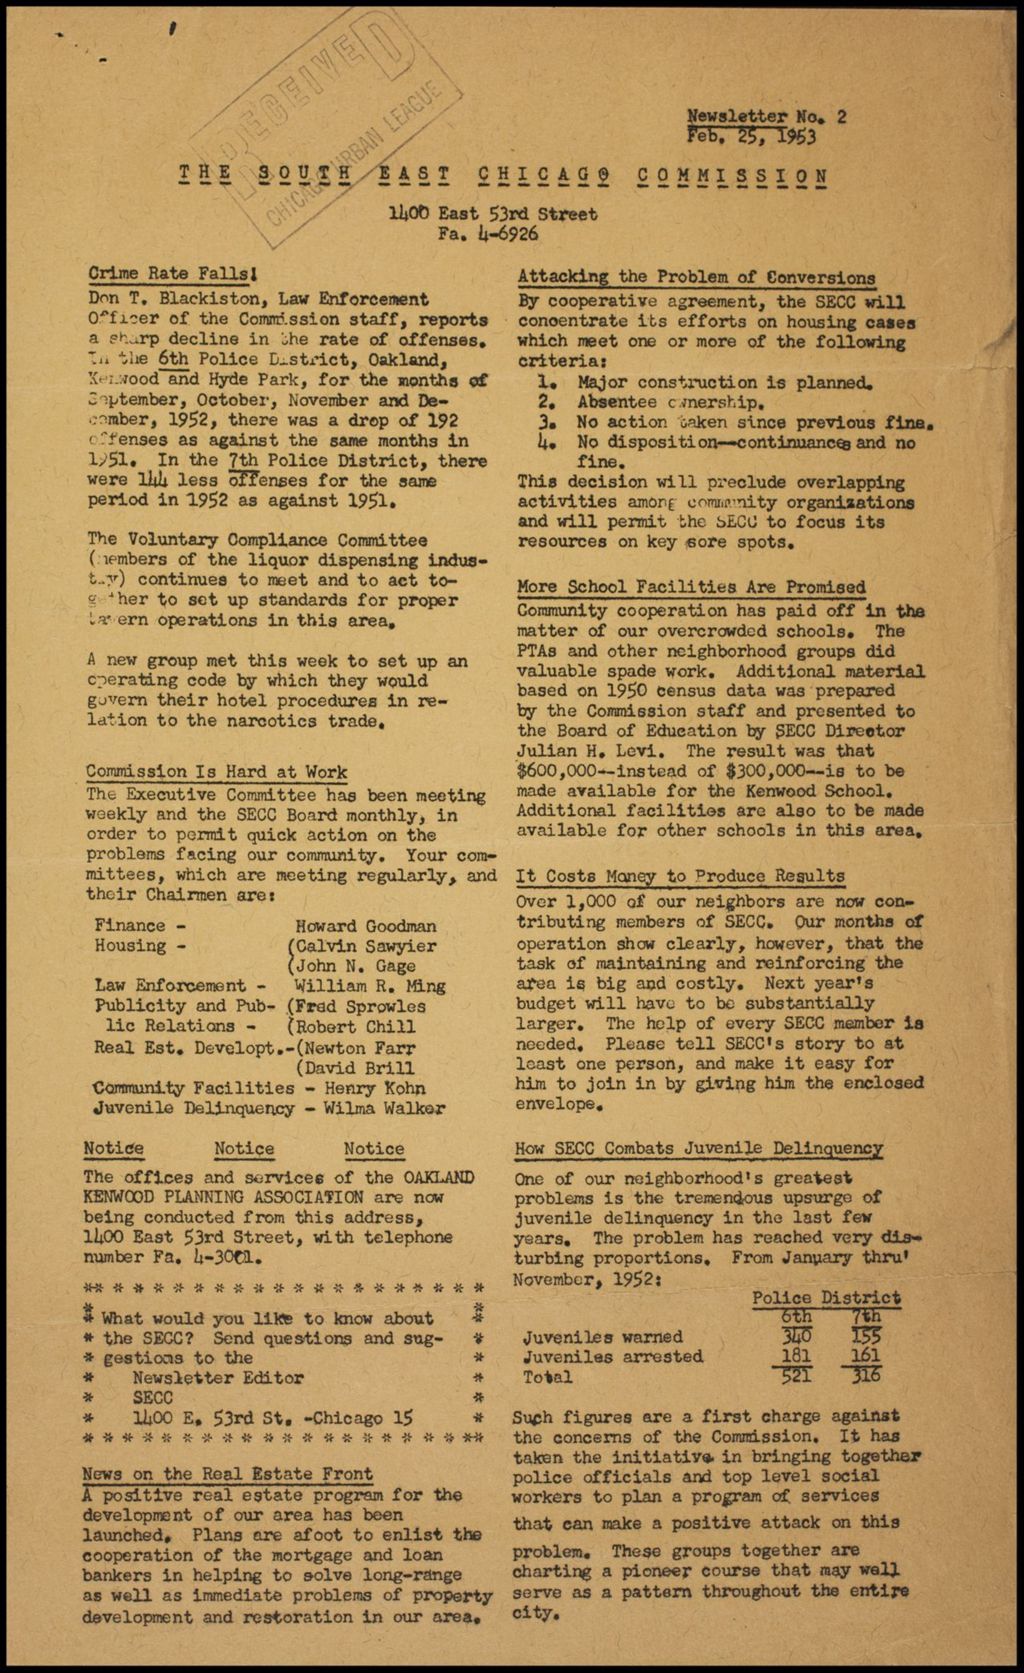 South East Chicago Commission - General, 1953 (Folder II-2330)